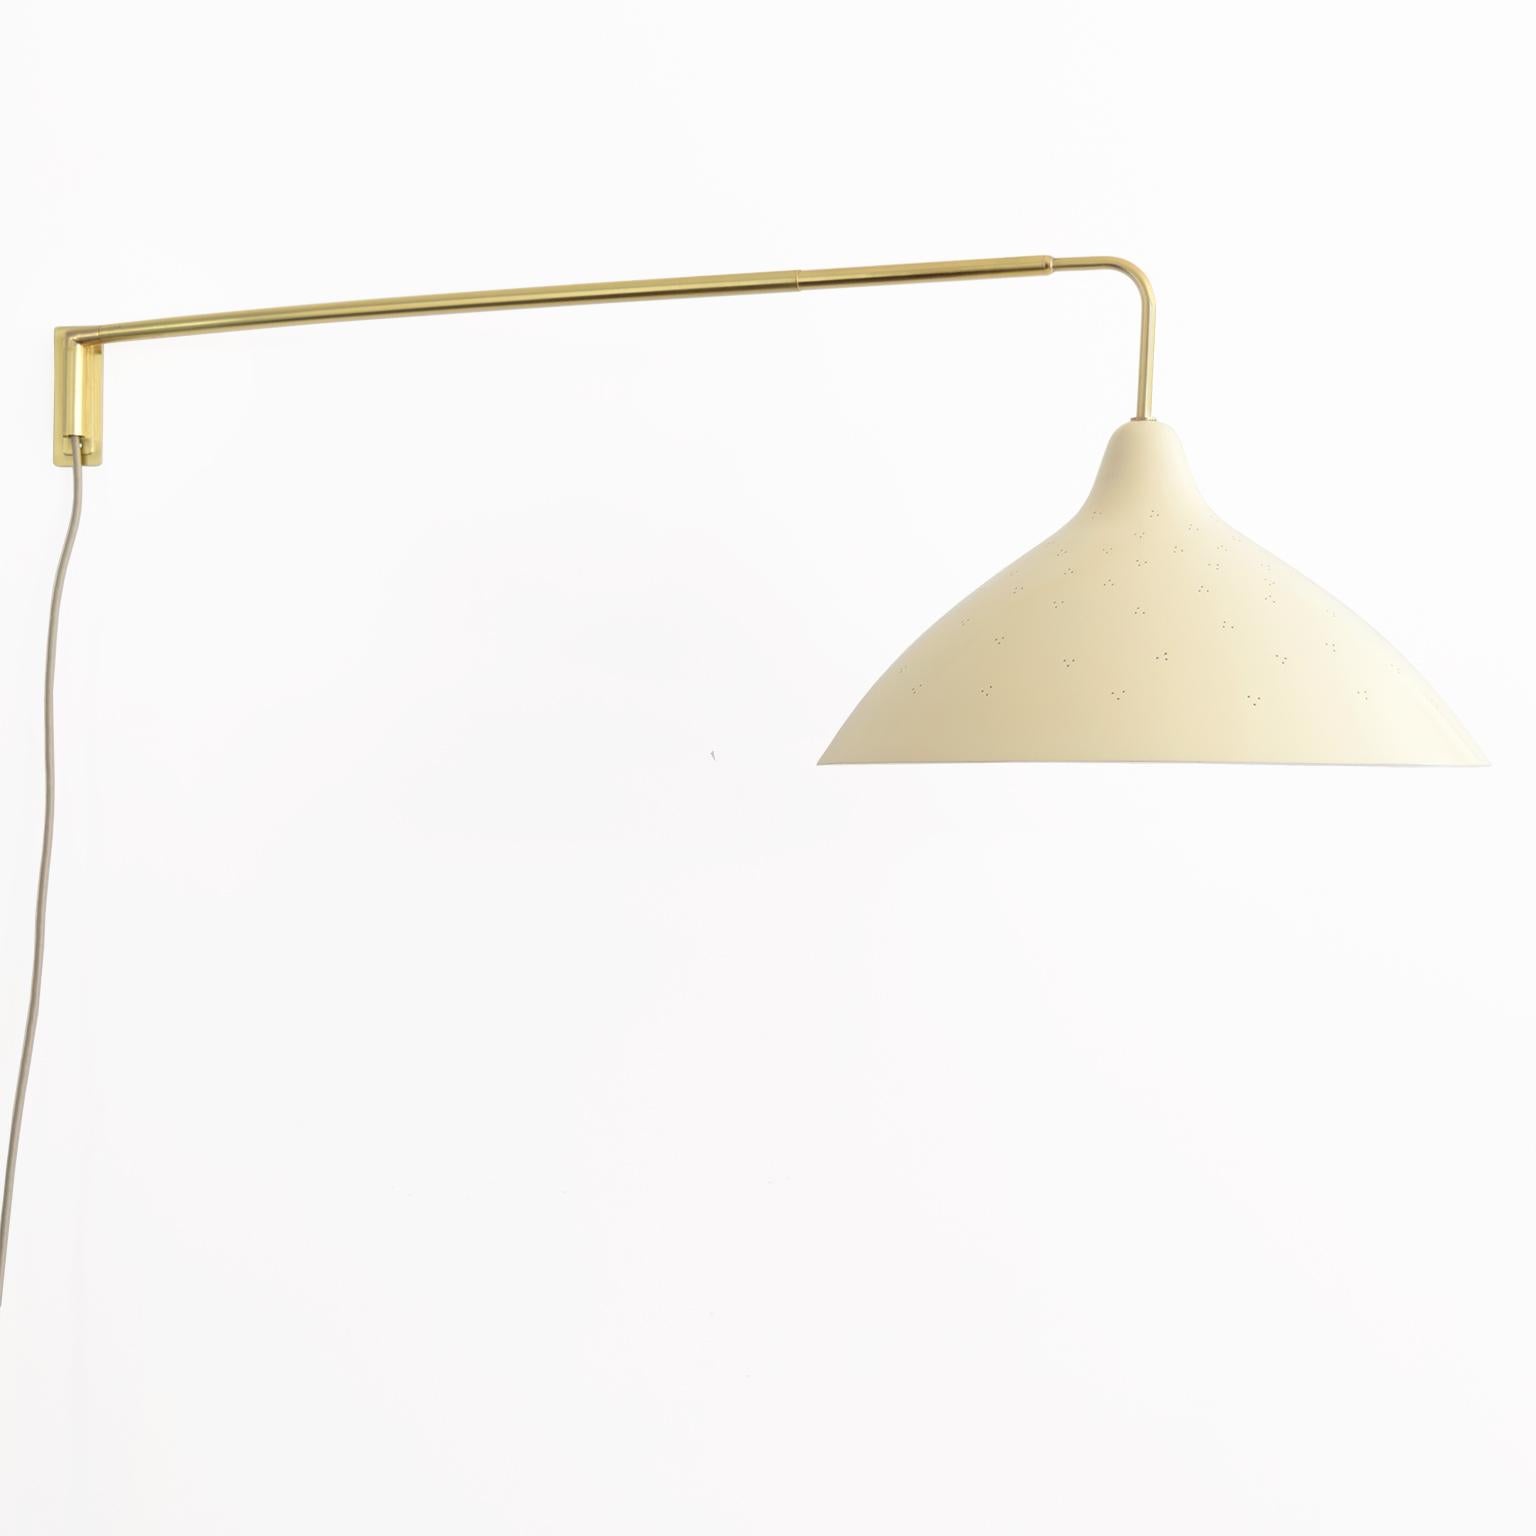 Lisa Johansson-Pape, Scandinavian Modern wall mounted swing arm lamp with pierced lacquered metal shade and extendable arm. Newly restored, re-polished and lacquered brass, newly lacquered aluminum shade in cream., wired for the USA with one